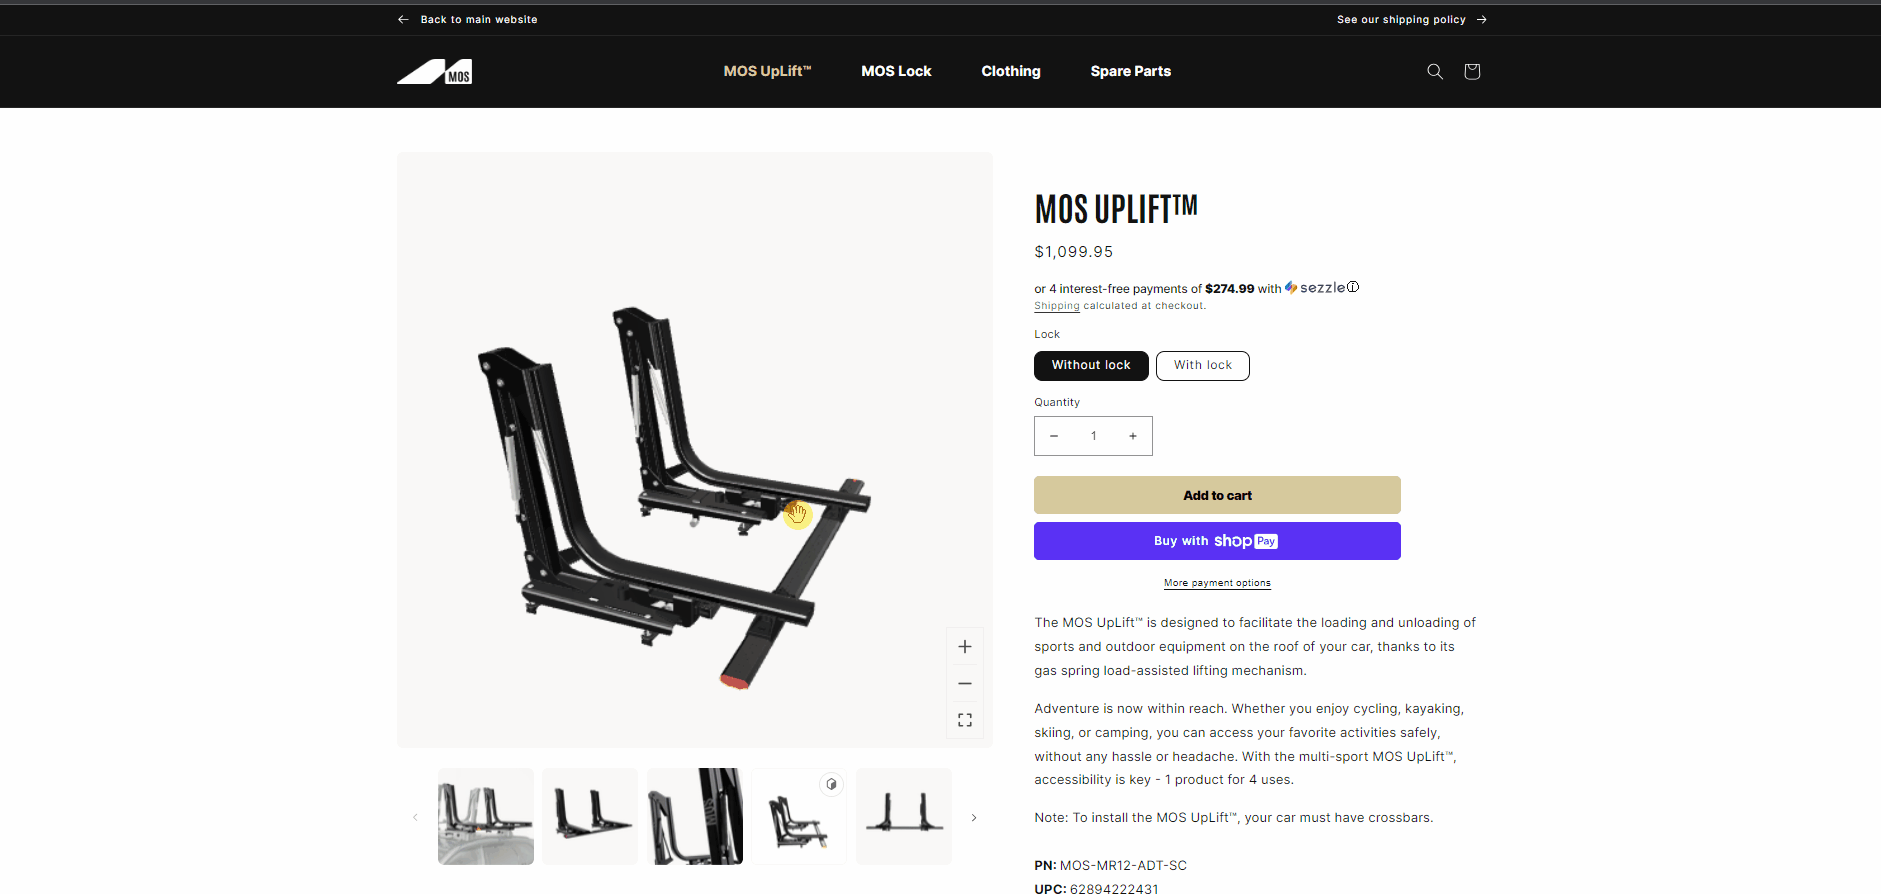 3d model viewer in ecommerce page